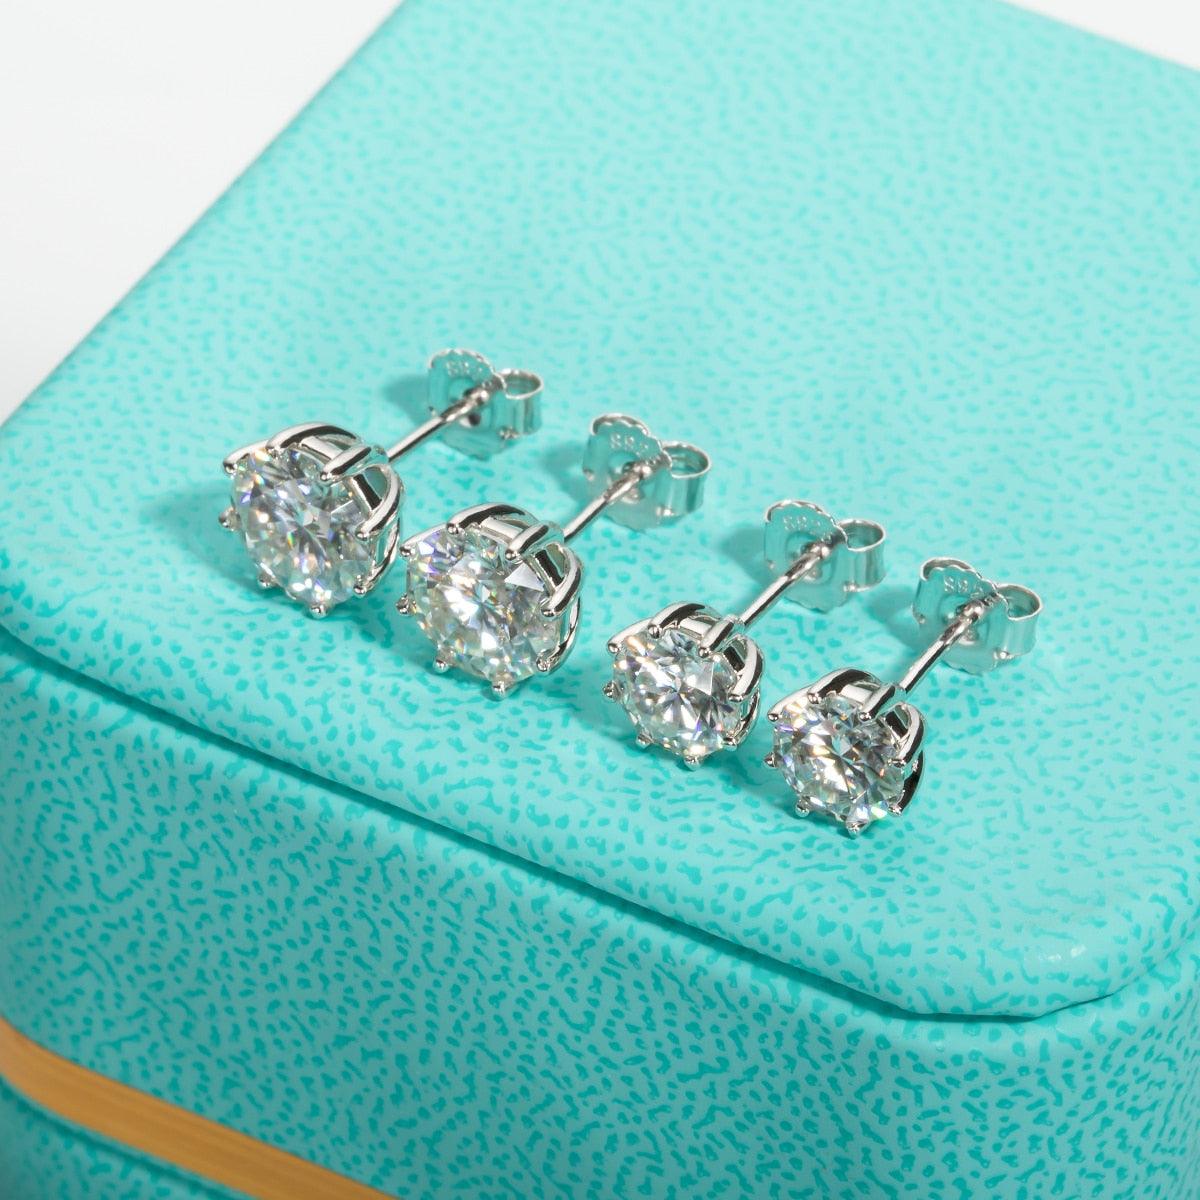 Excellent 2CT D Color VVS1 ♥︎ High Quality Moissanite Diamonds ♥︎ 8-Prong Stud Earrings - Fine Jewellery - The Jewellery Supermarket